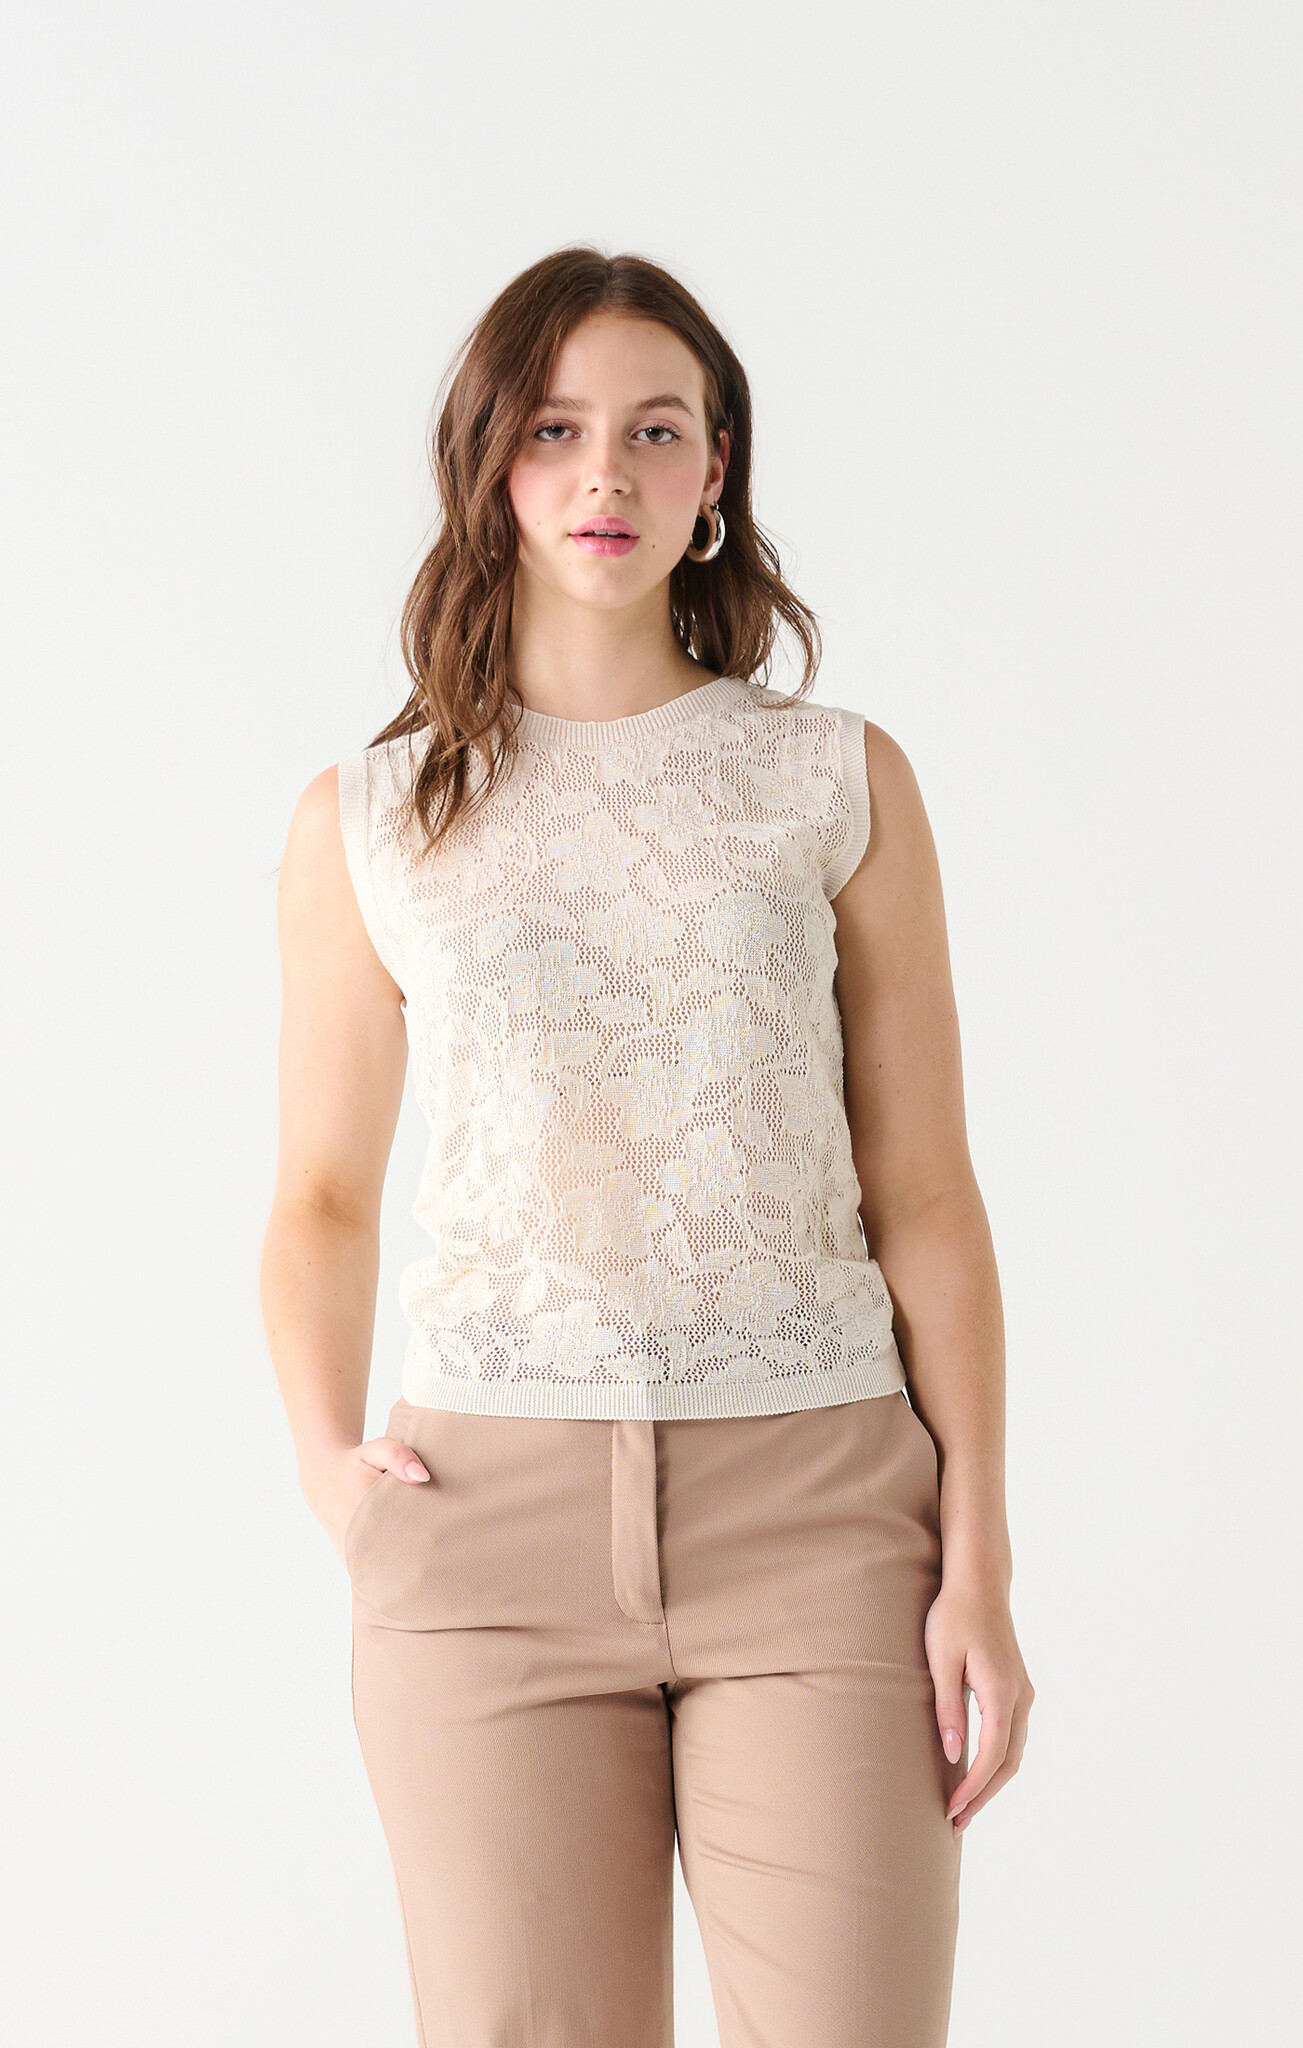 FLORAL OPENWORK KNIT TOP